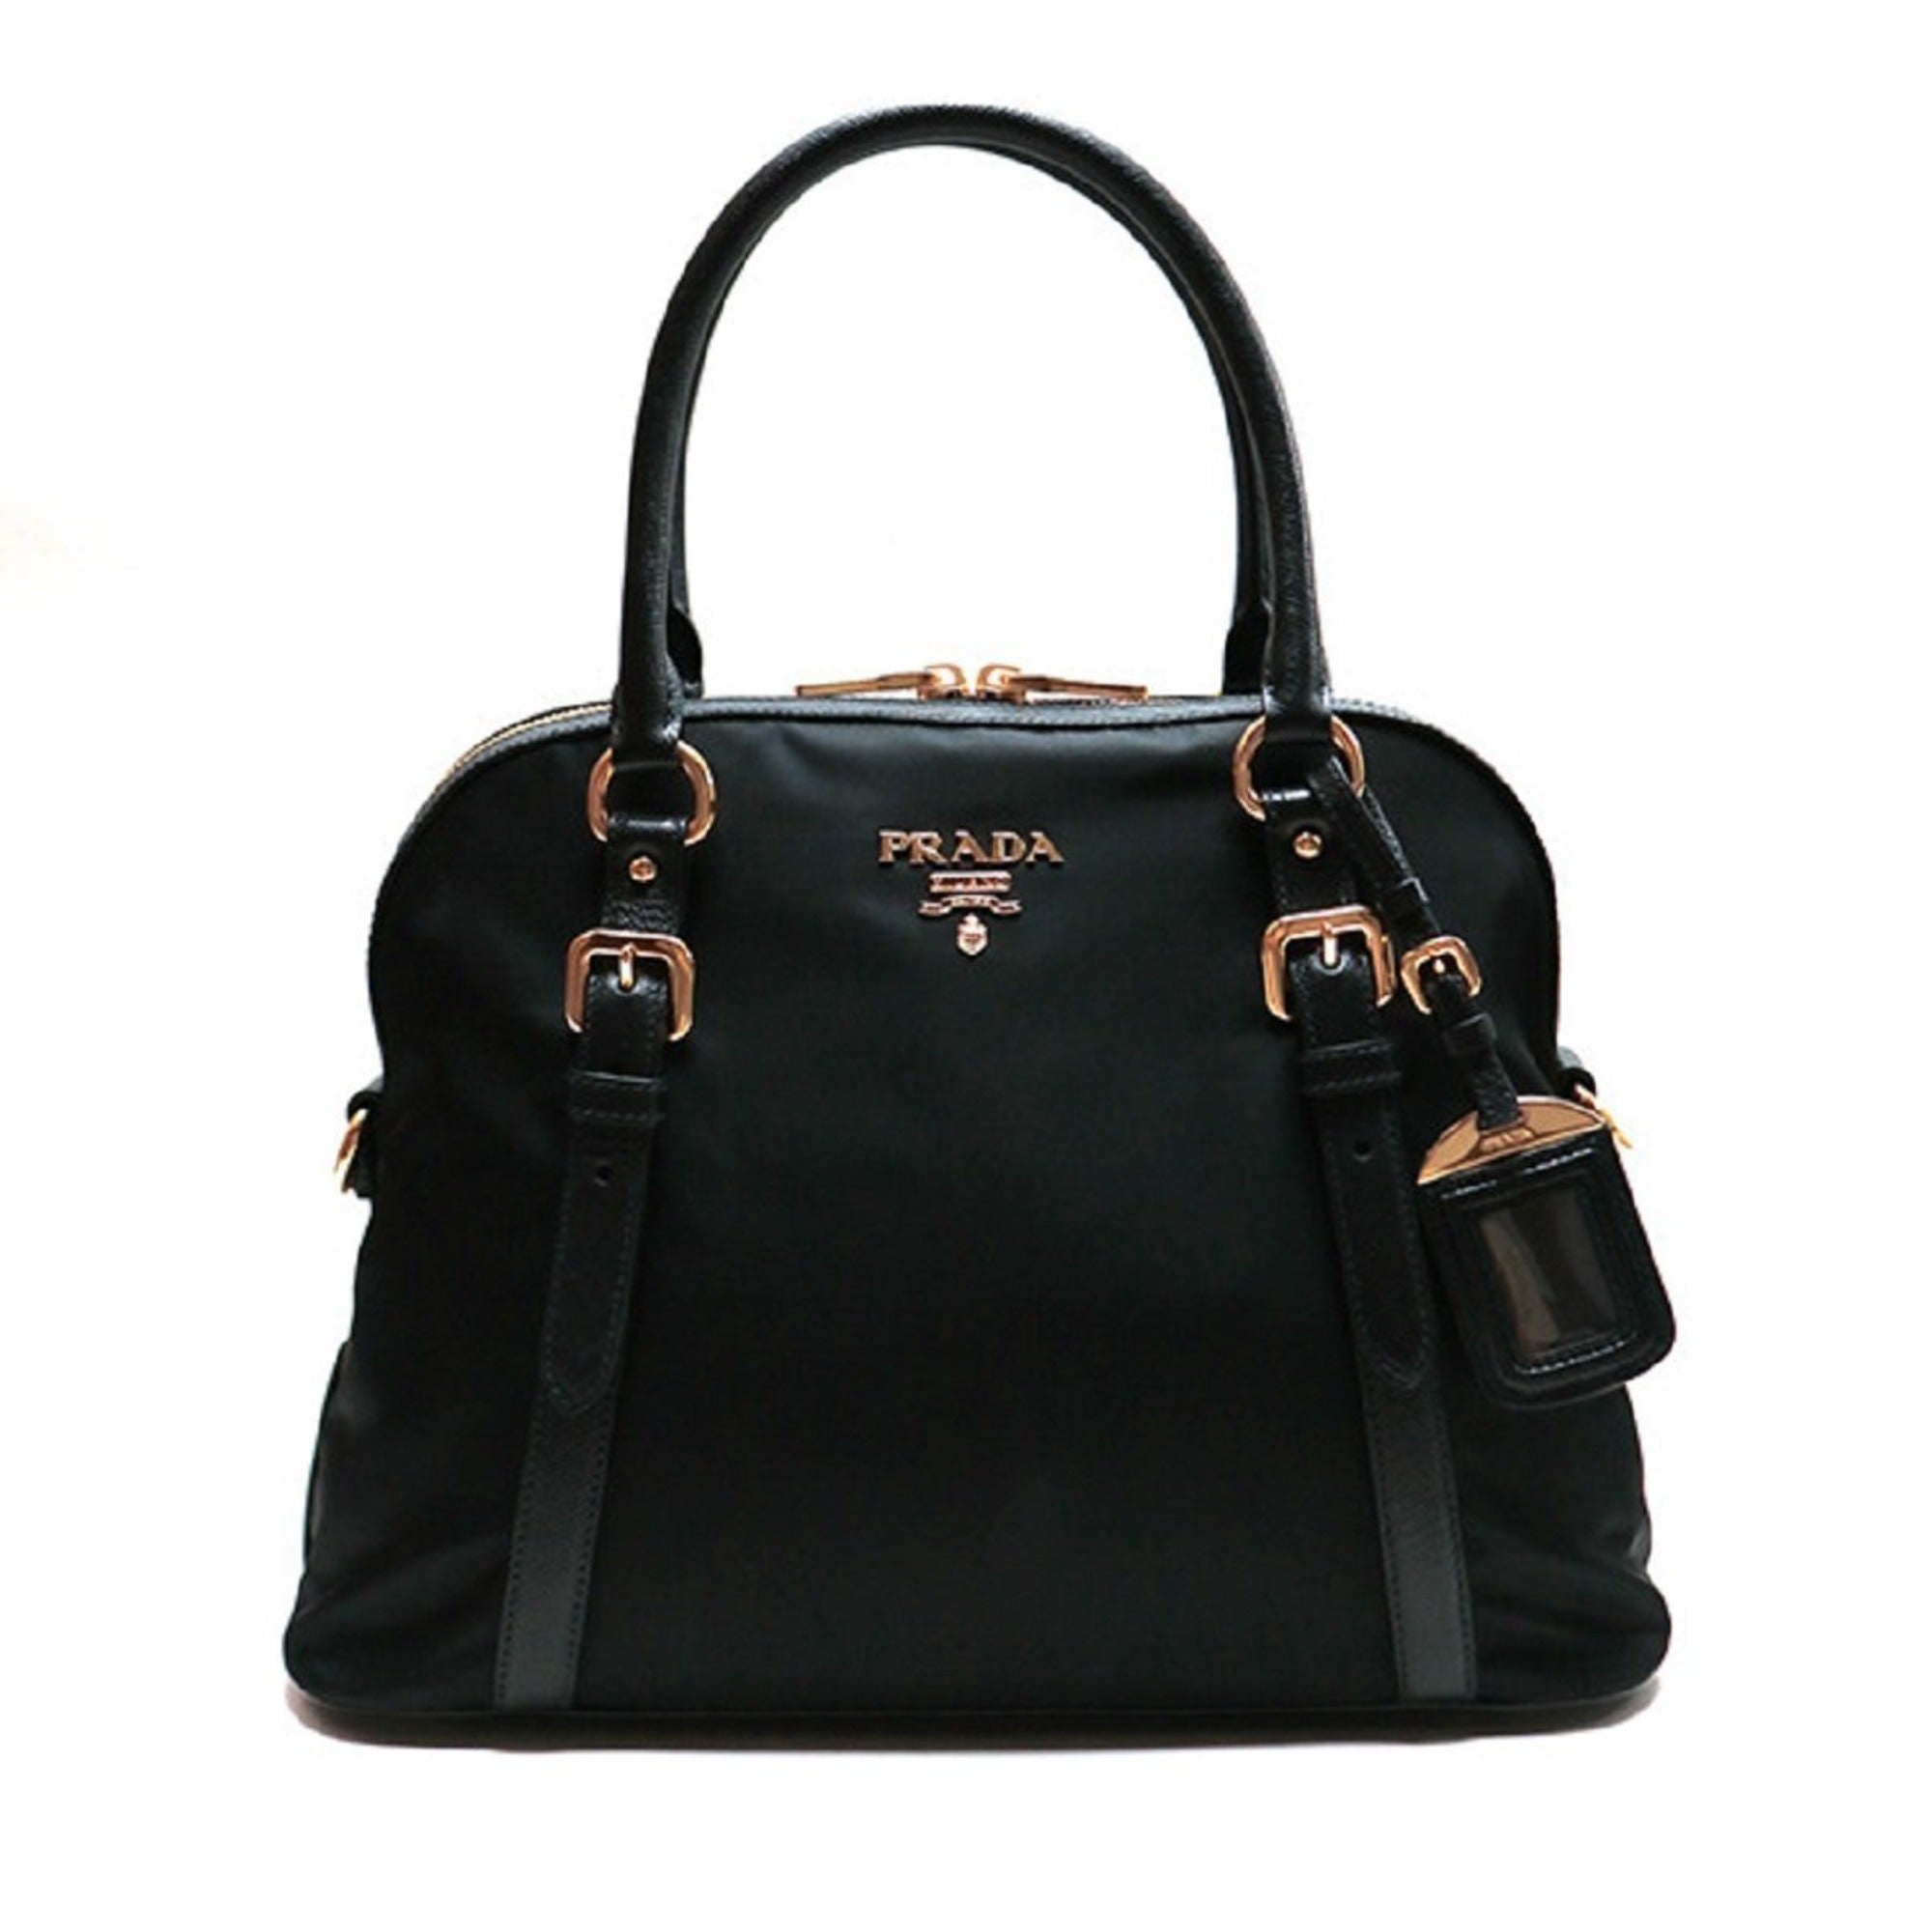 Prada Tessuto Nylon and Saffiano Leather Black Convertible Satchel Bag 1BB013 at_Queen_Bee_of_Beverly_Hills